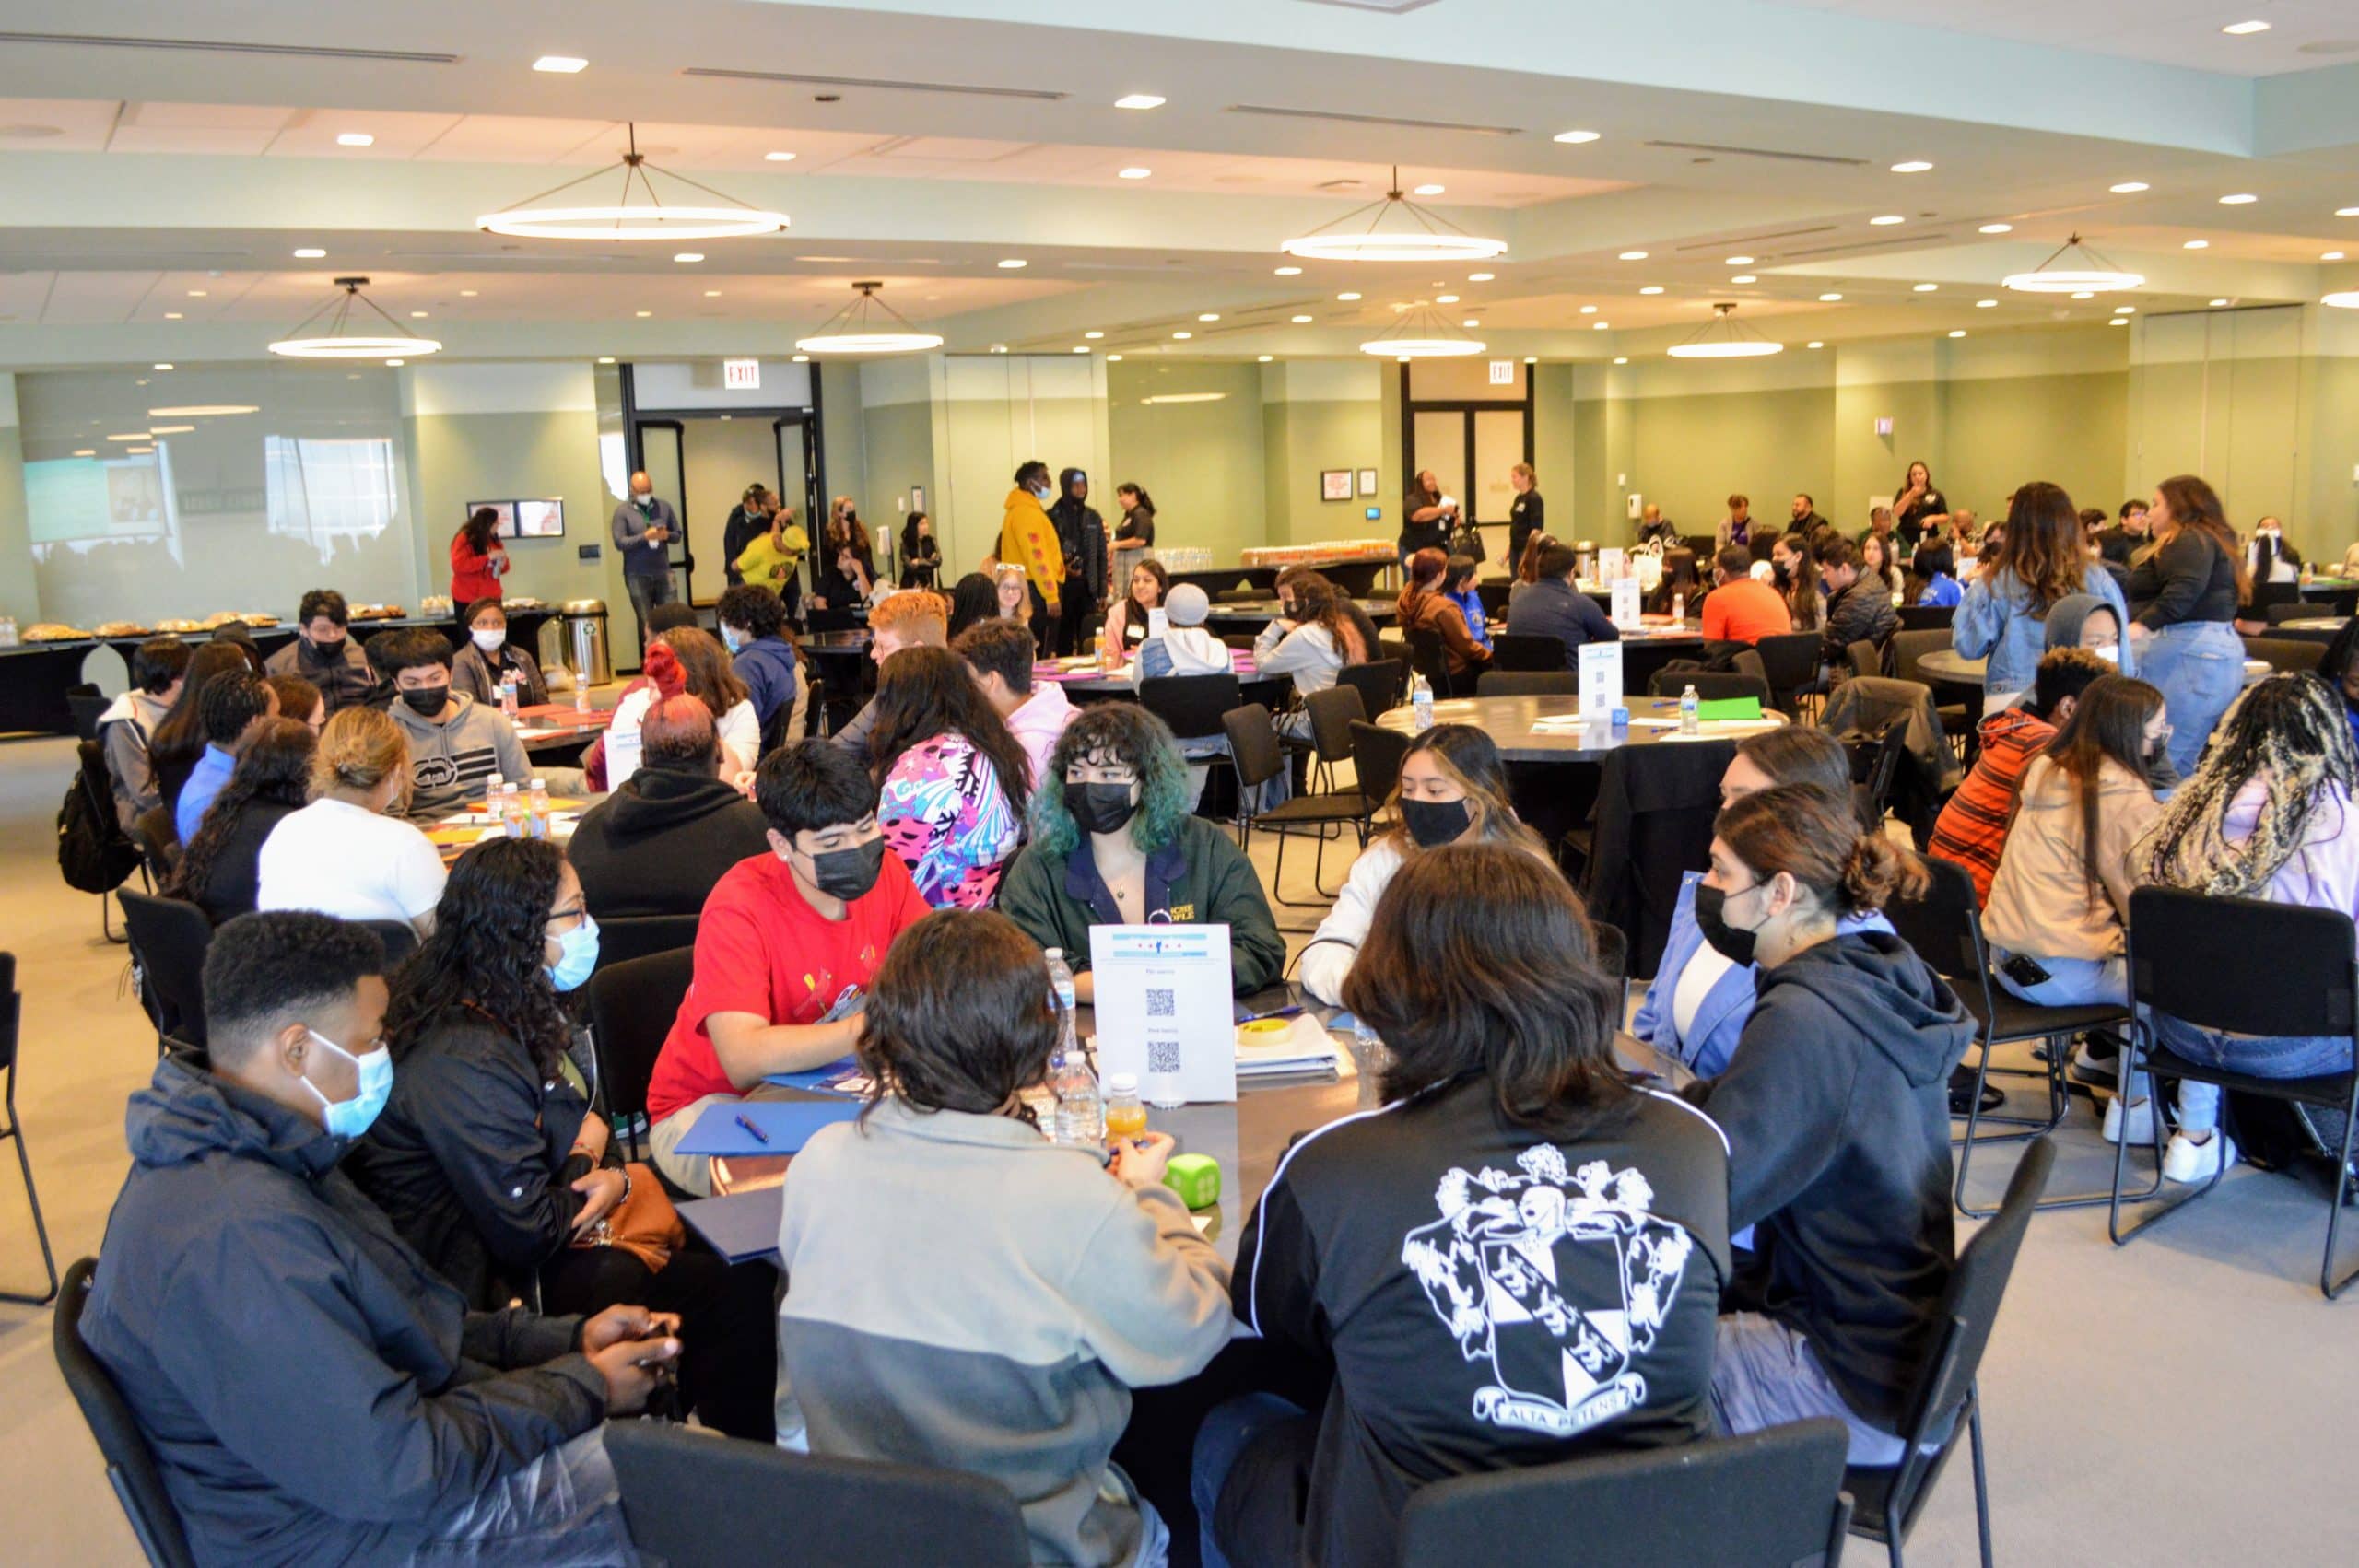 The event drew a diverse group of students who were eager to get to know their peers from other schools